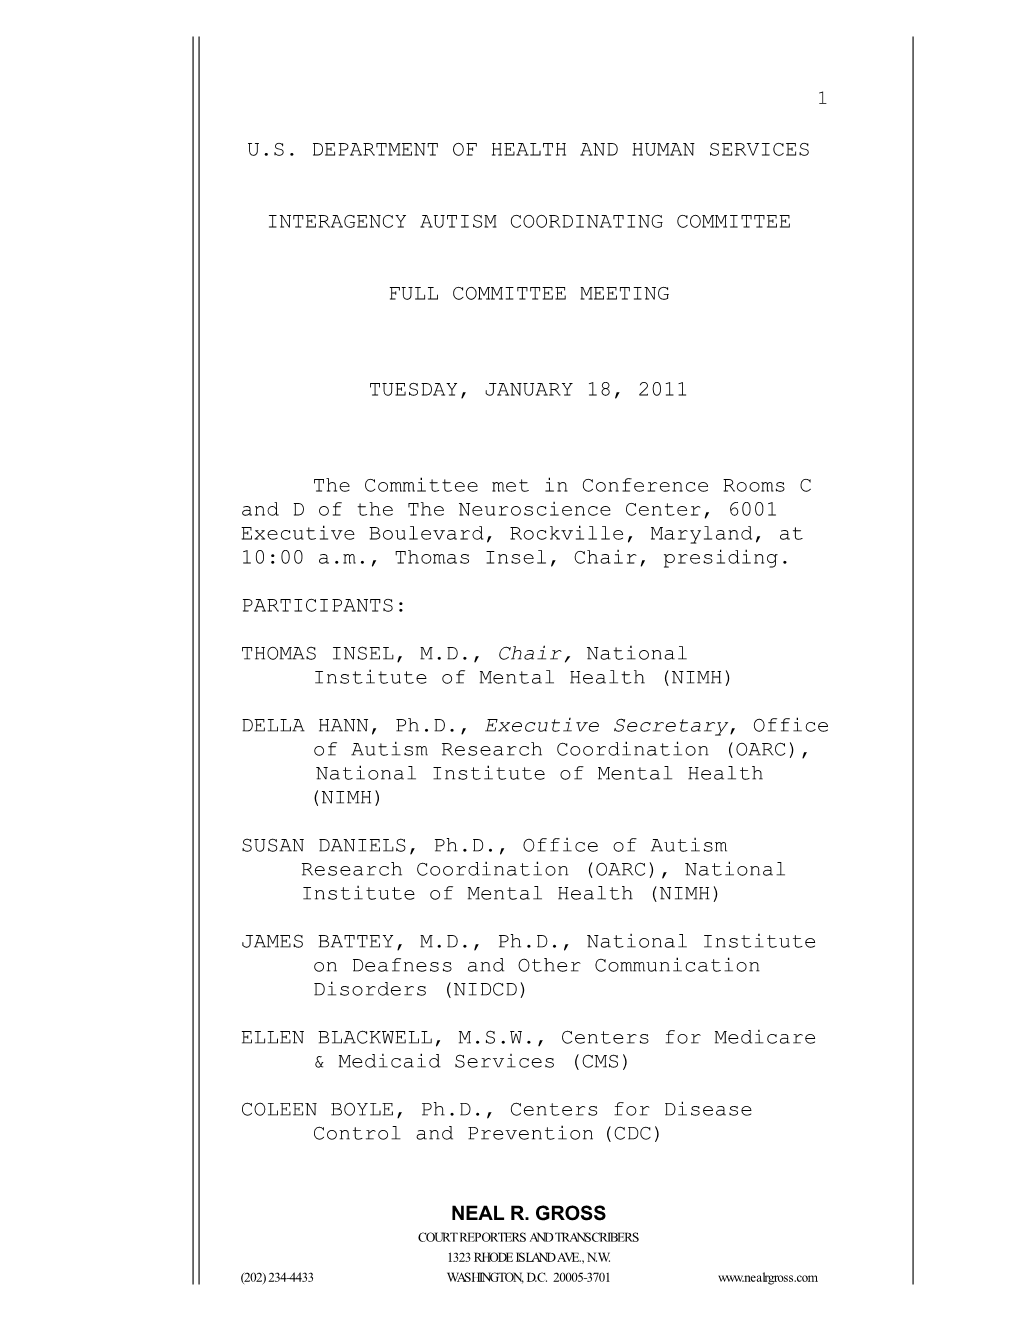 Transcript for the IACC Full Committee Meeting on January 18, 2011